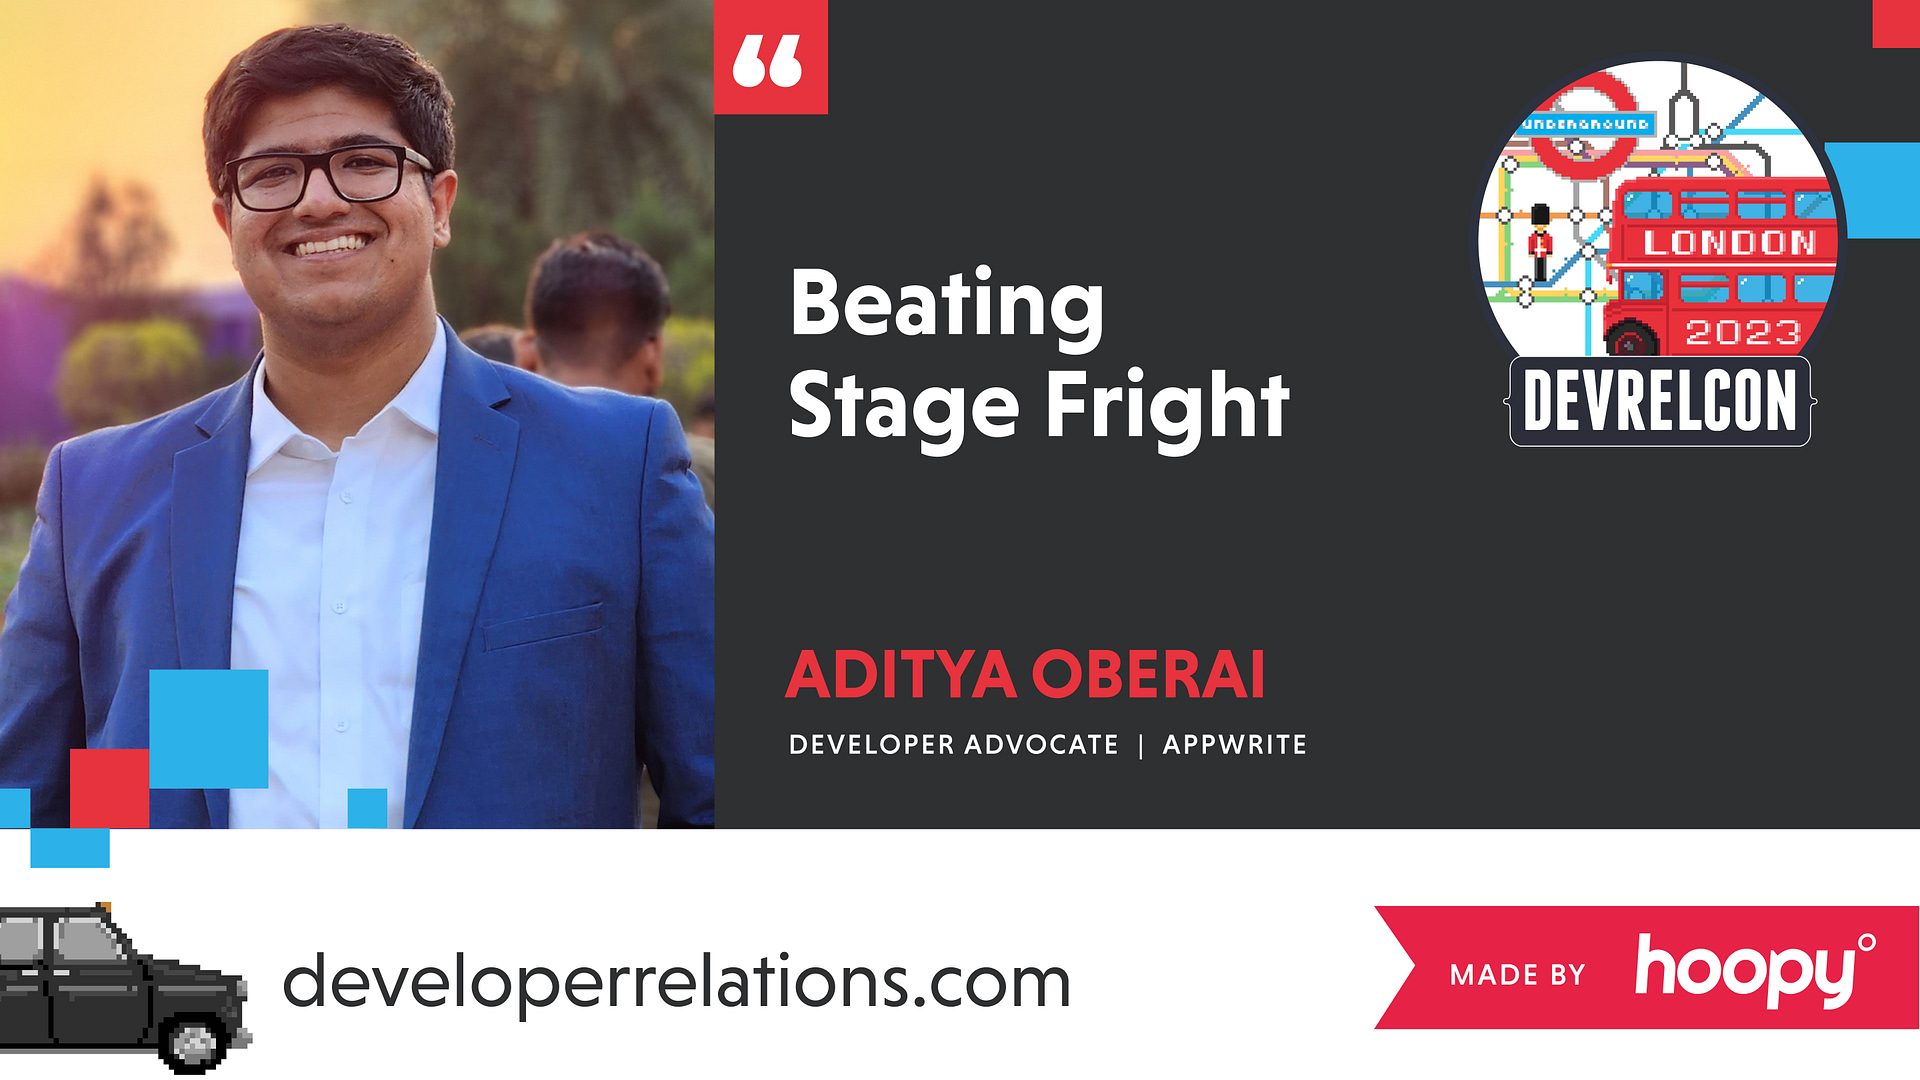 The image features a promotional graphic for a speaking event. On the left, there's a photo of a smiling man in a blue blazer and white shirt. To his right, the text reads "Beating Stage Fright" in large white letters on a black background, followed by "ADITYA OBERAI, DEVELOPER ADVOCATE | APPWRITE" in smaller white text. There's a logo of "DEVRELCON LONDON 2023" in the upper right corner, with illustrations representing London, such as the Underground sign and a red double-decker bus. Below the main image, there's a website address "developerrelations.com" and in the bottom right corner, there's a red banner with the text "MADE BY hoopy" in white. The overall color scheme includes shades of blue, red, and black.